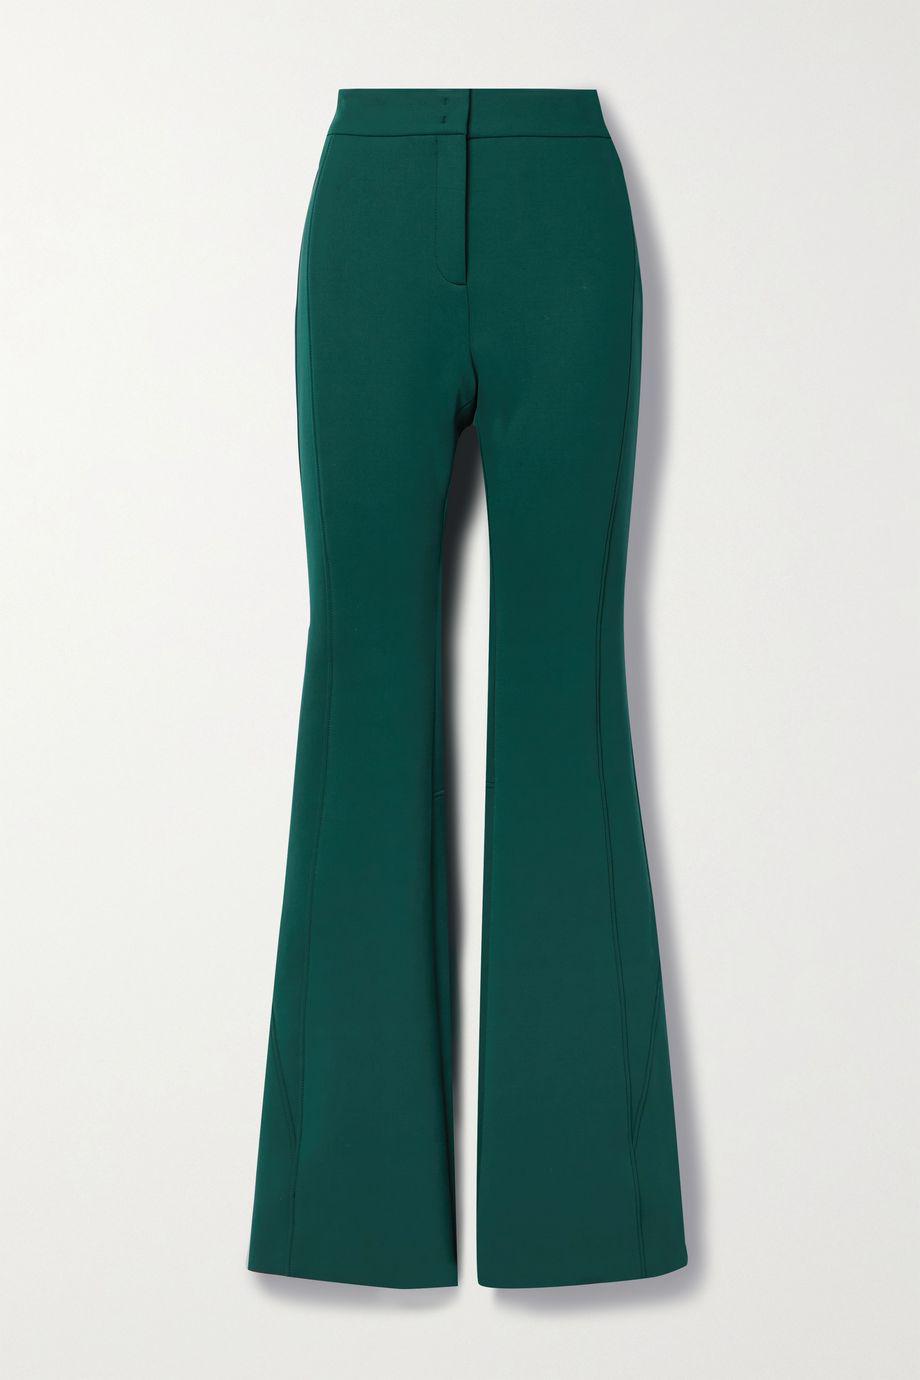 Faris stretch-cady flared pants by AKRIS